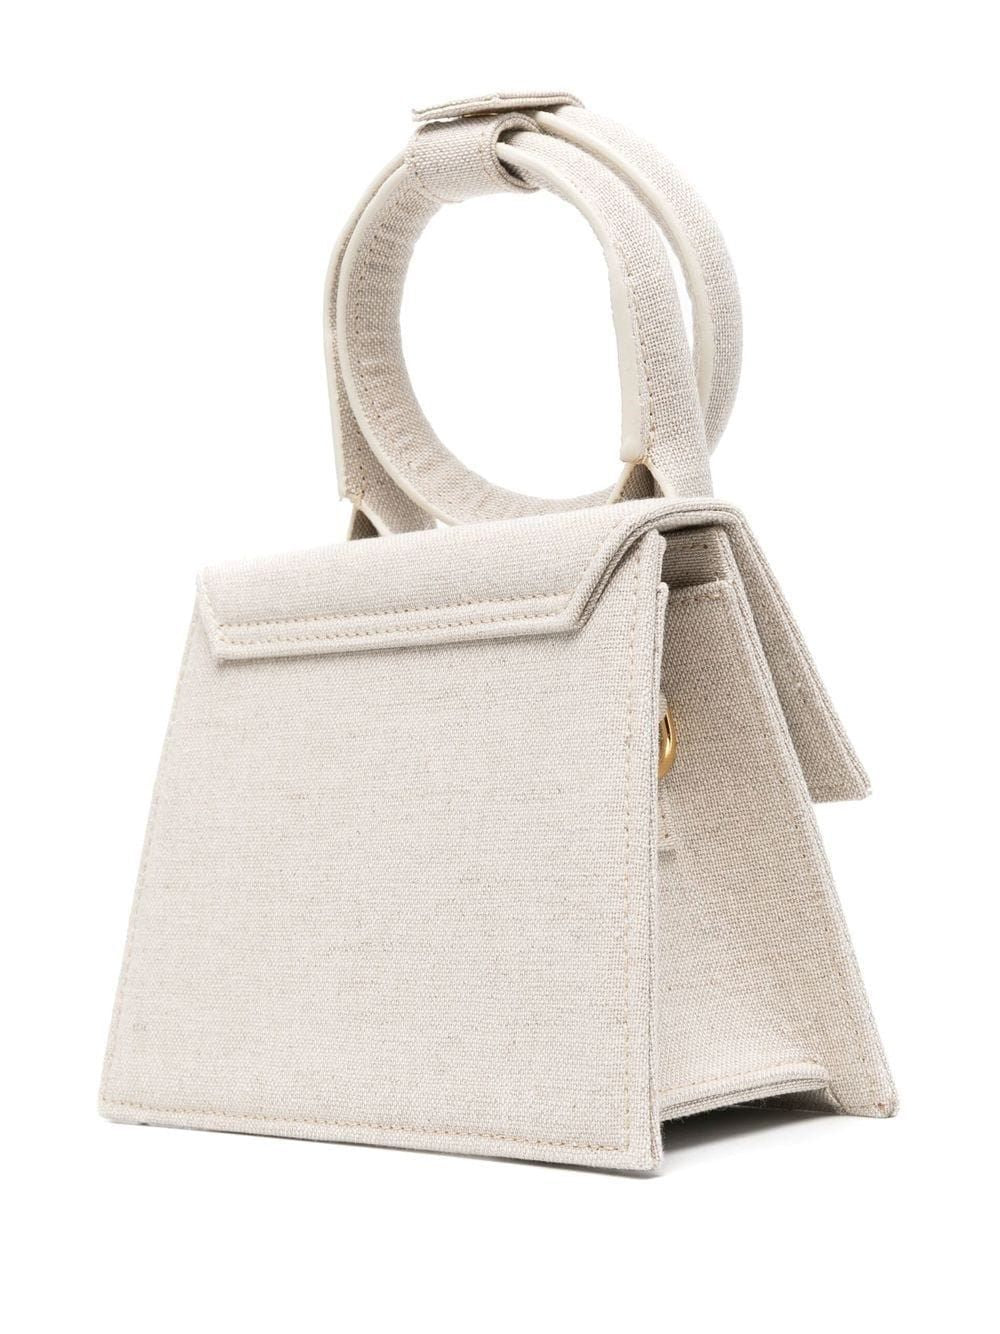 JACQUEMUS Light Grey Mini Bag with Knot Detail for Women